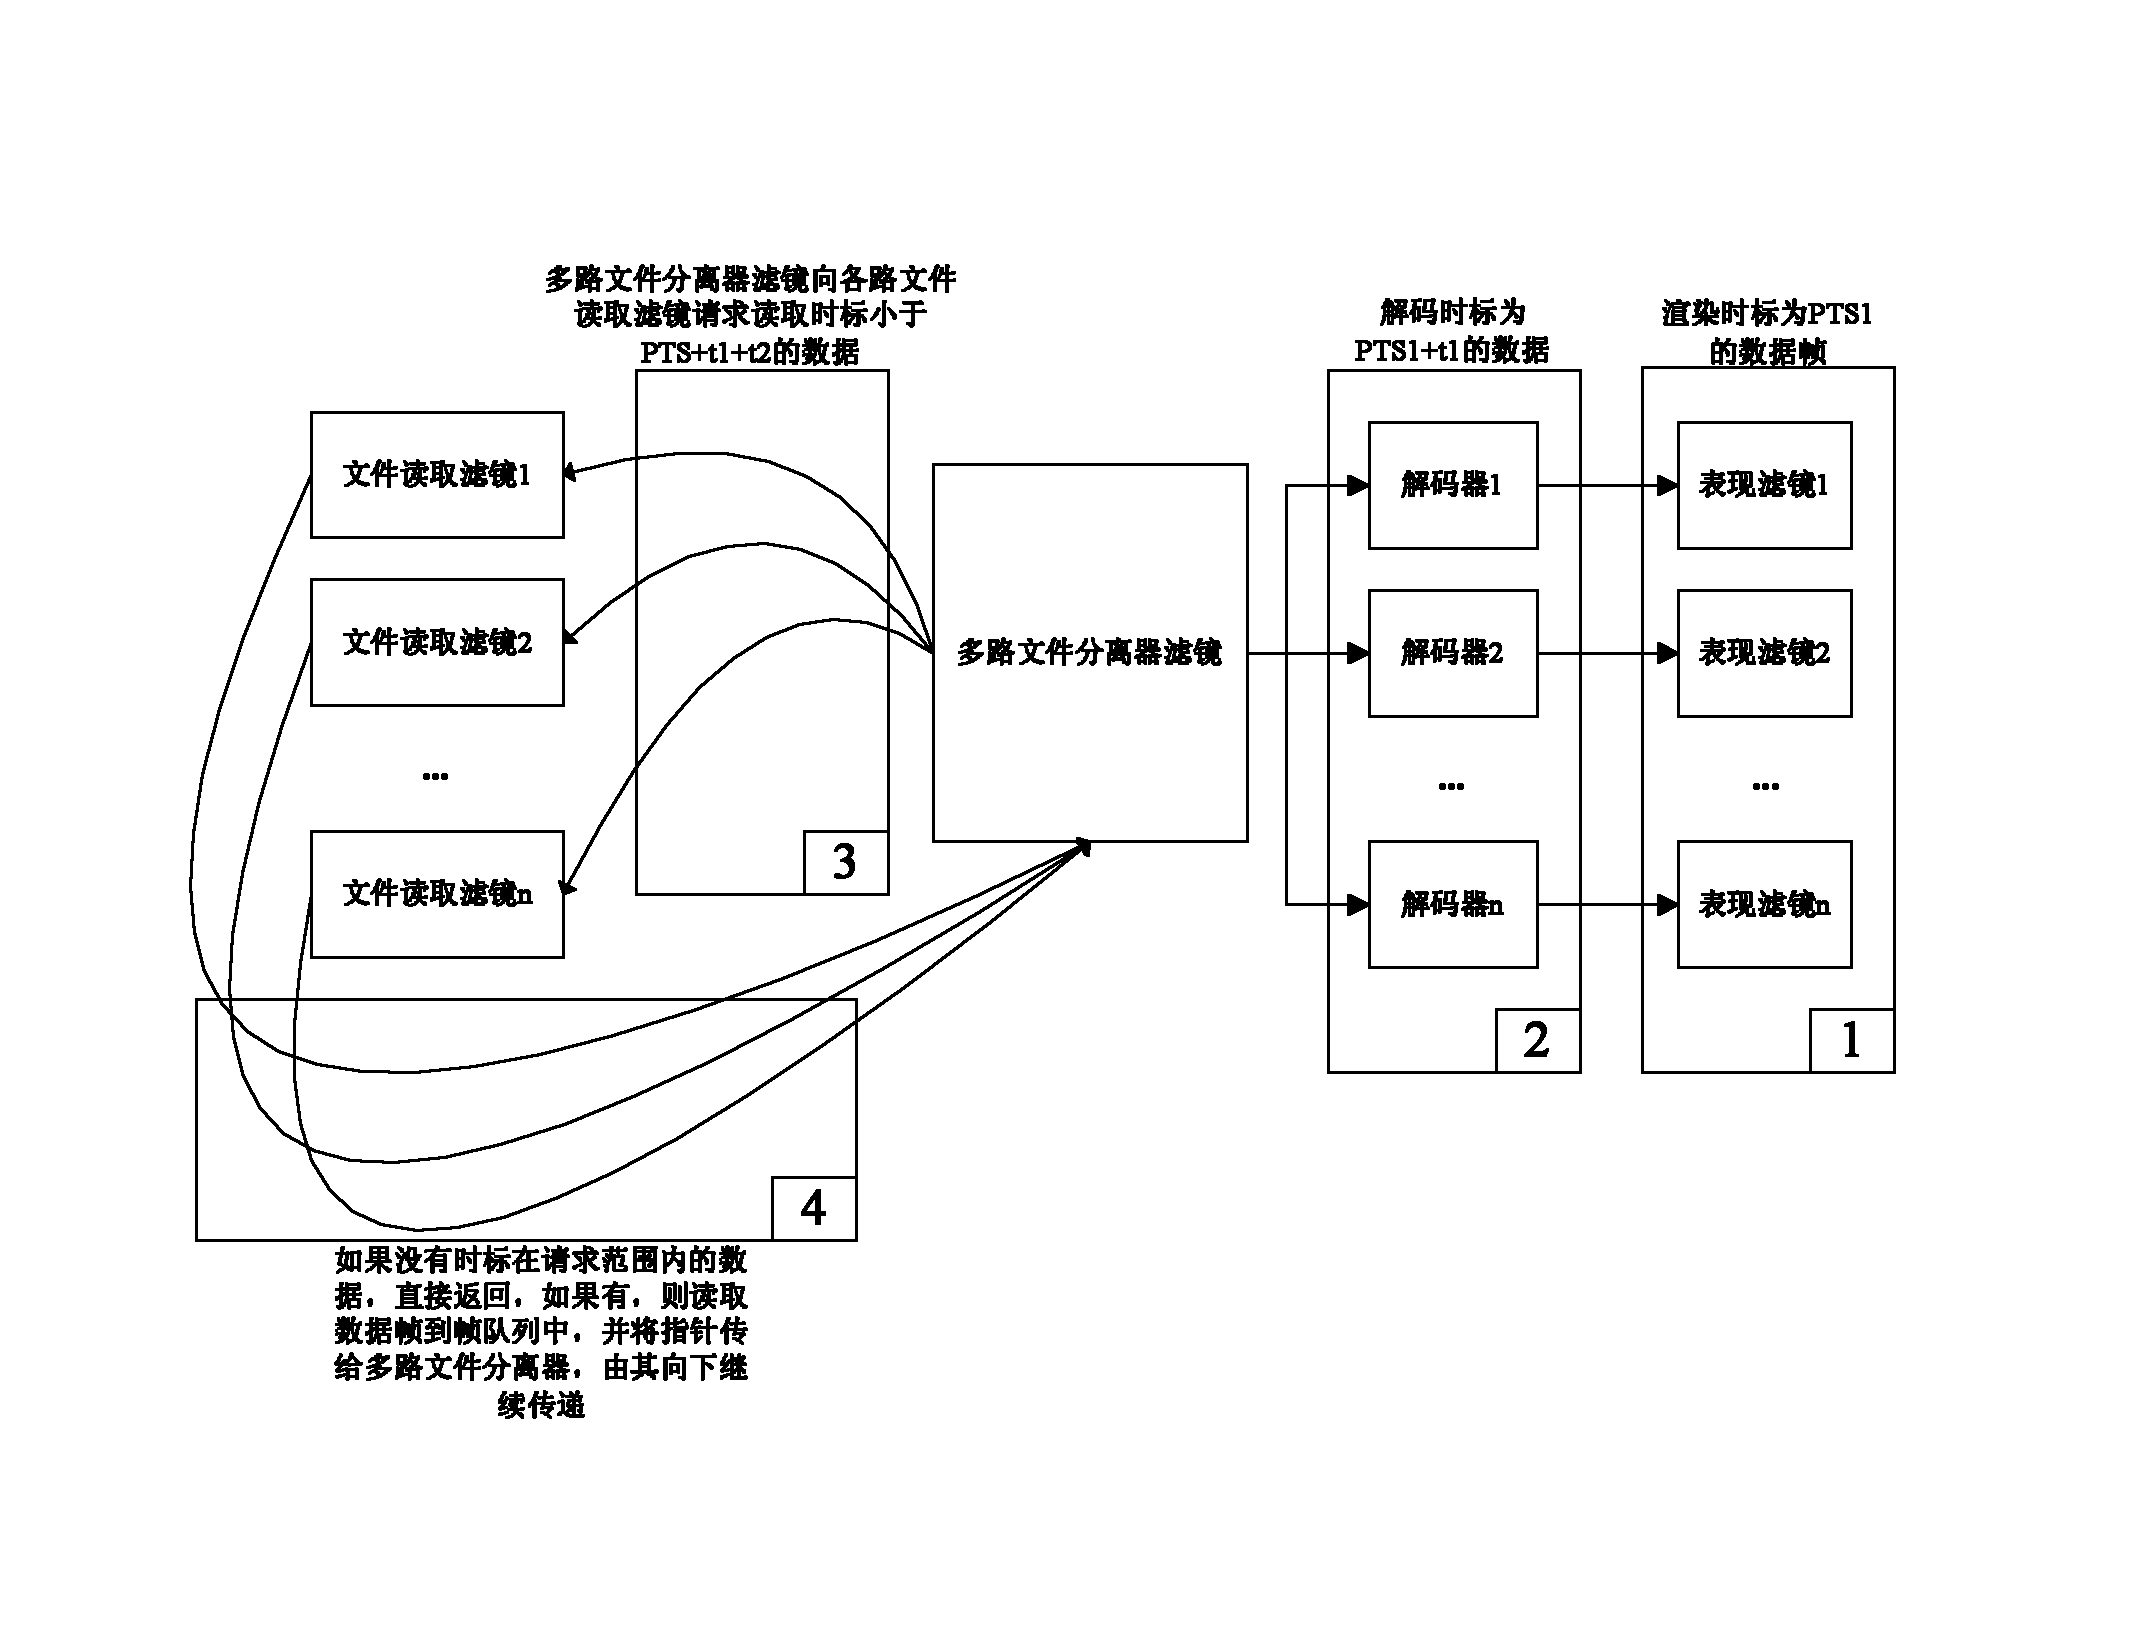 Synchronous replay system for multi-channel audio and video and method thereof